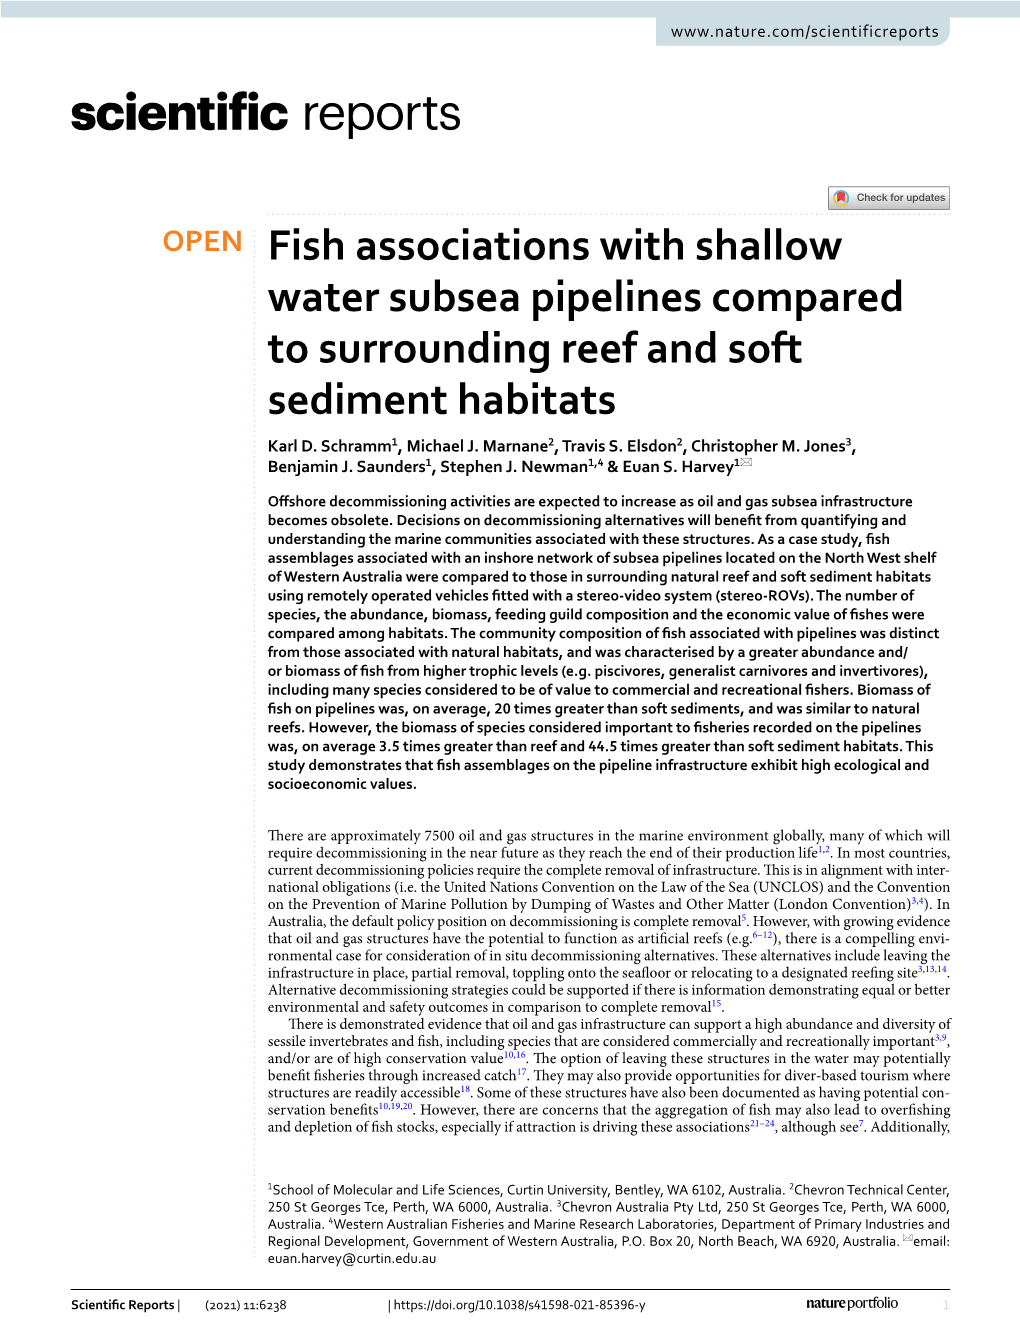 Fish Associations with Shallow Water Subsea Pipelines Compared to Surrounding Reef and Soft Sediment Habitats Karl D